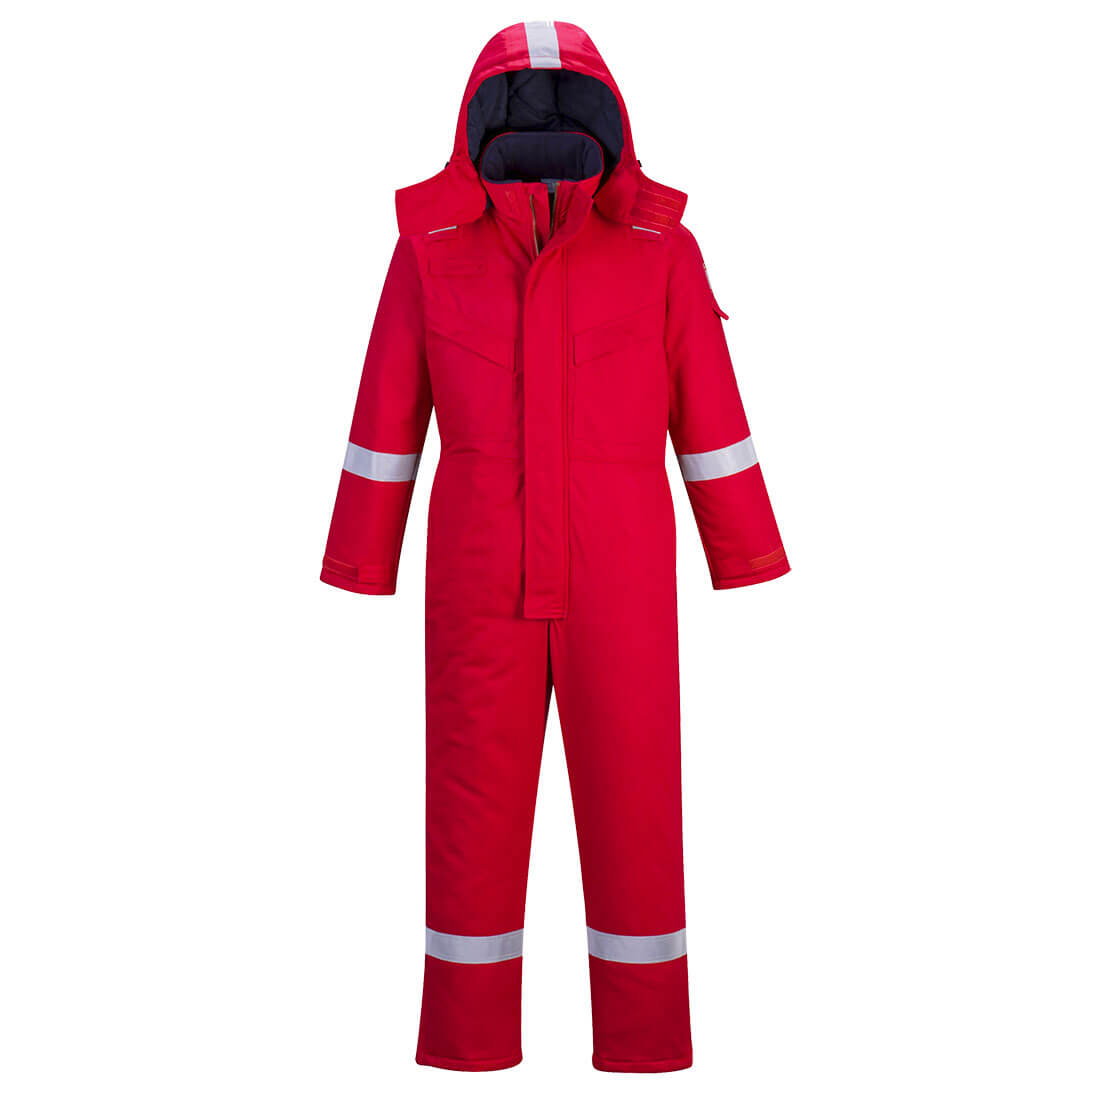 Image of Biz Flame Mens Flame Resistant Antistatic Winter Overall Red 2XL 32"